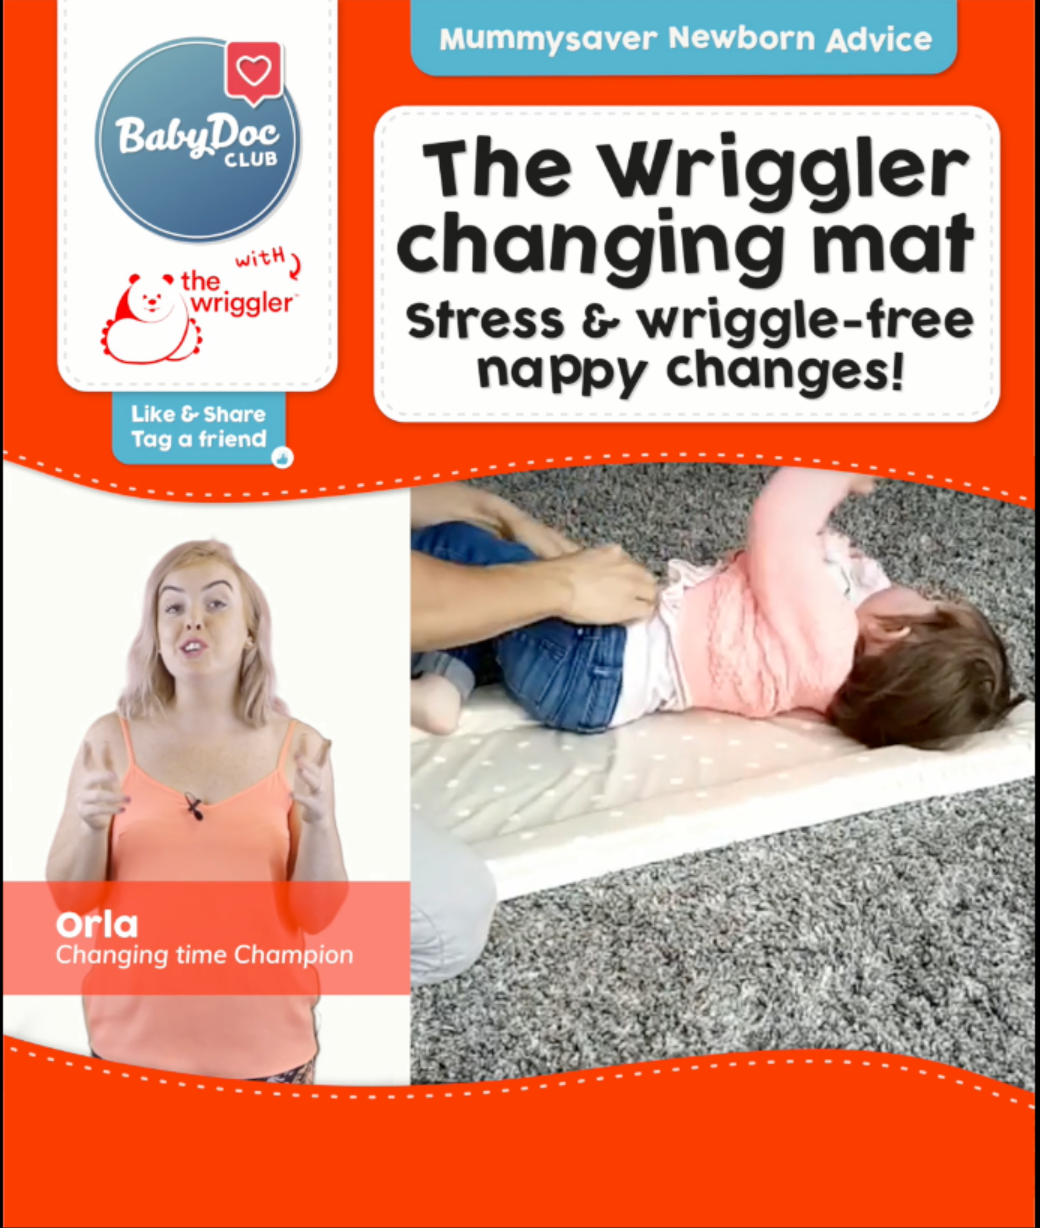 The Wriggler changing mat for babies and toddles who wiggle at nappy changes